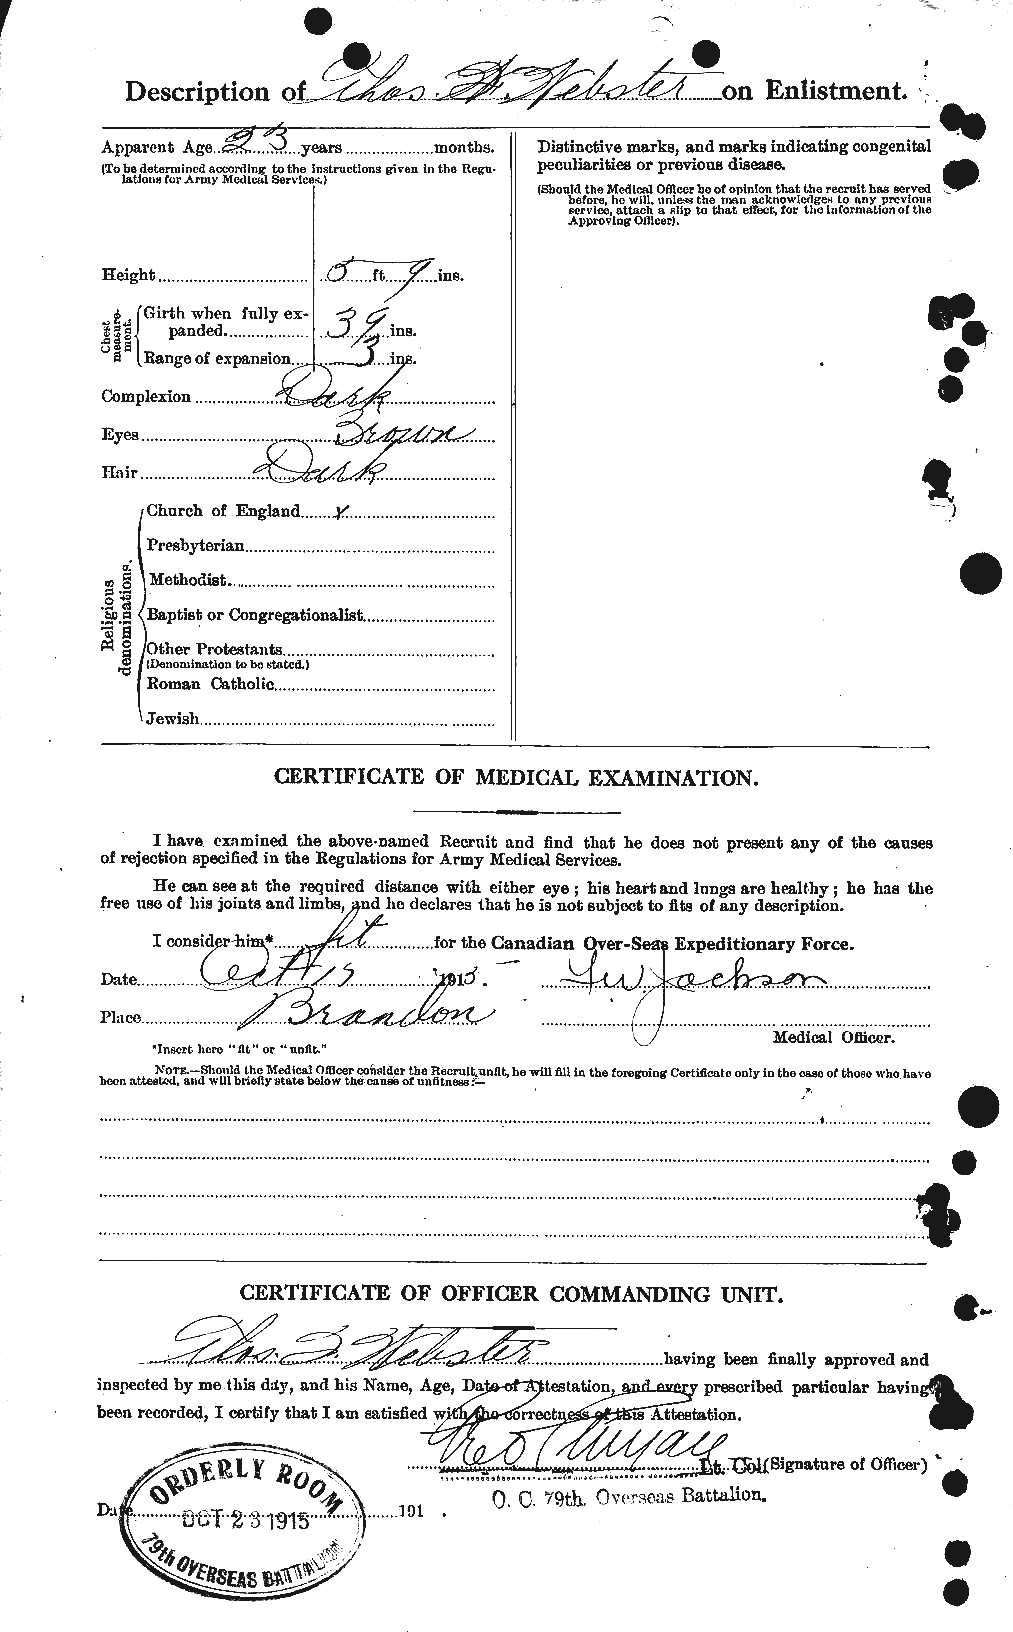 Personnel Records of the First World War - CEF 661991b